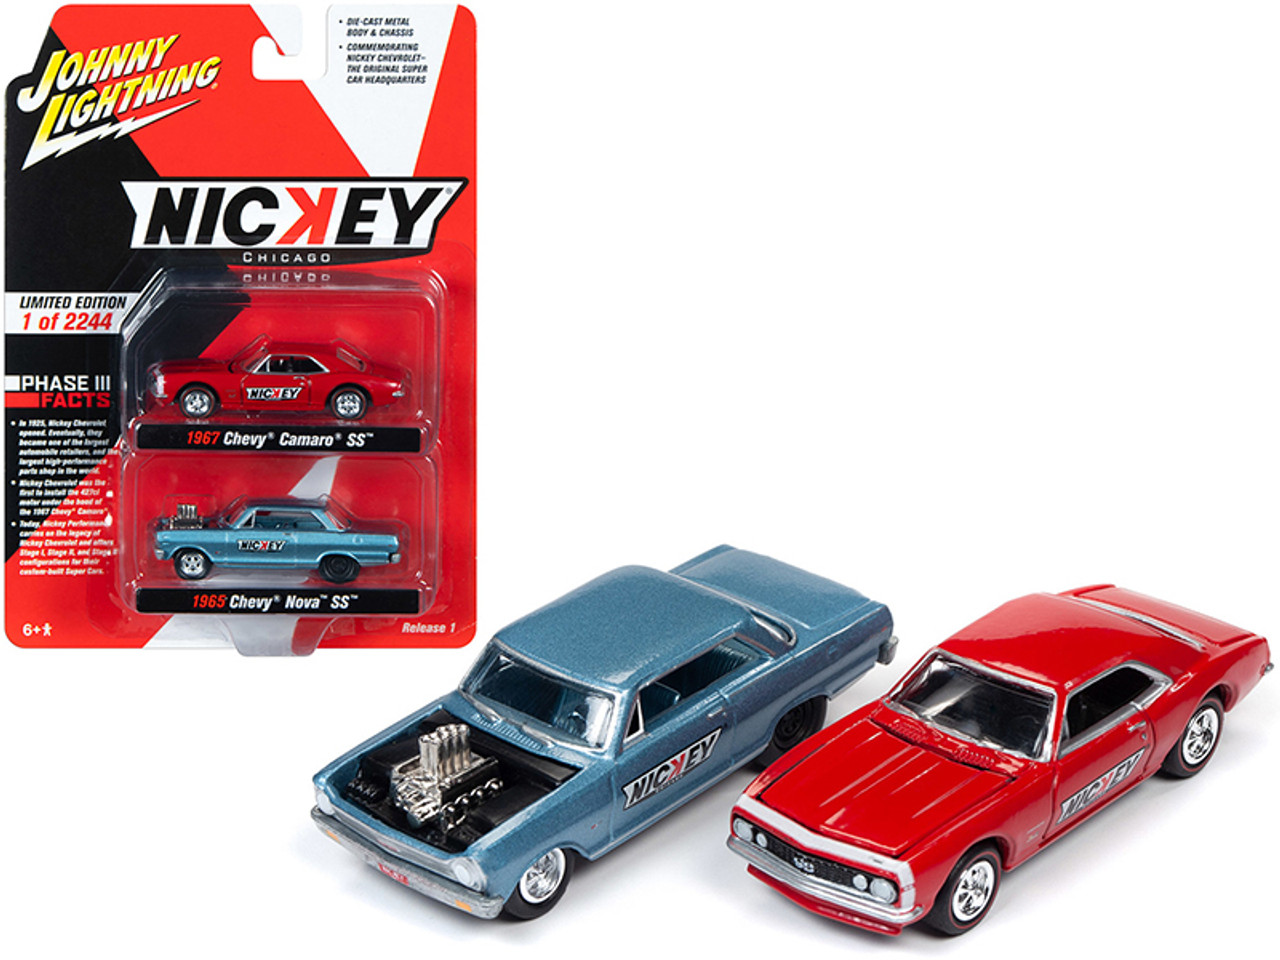 1965 Chevrolet Nova SS Blue Metallic and 1967 Chevrolet Camaso SS Red 2 piece Set "Nickey" Limited Edition to 2244 pieces Worldwide 1/64 Diecast Model Cars by Johnny Lightning